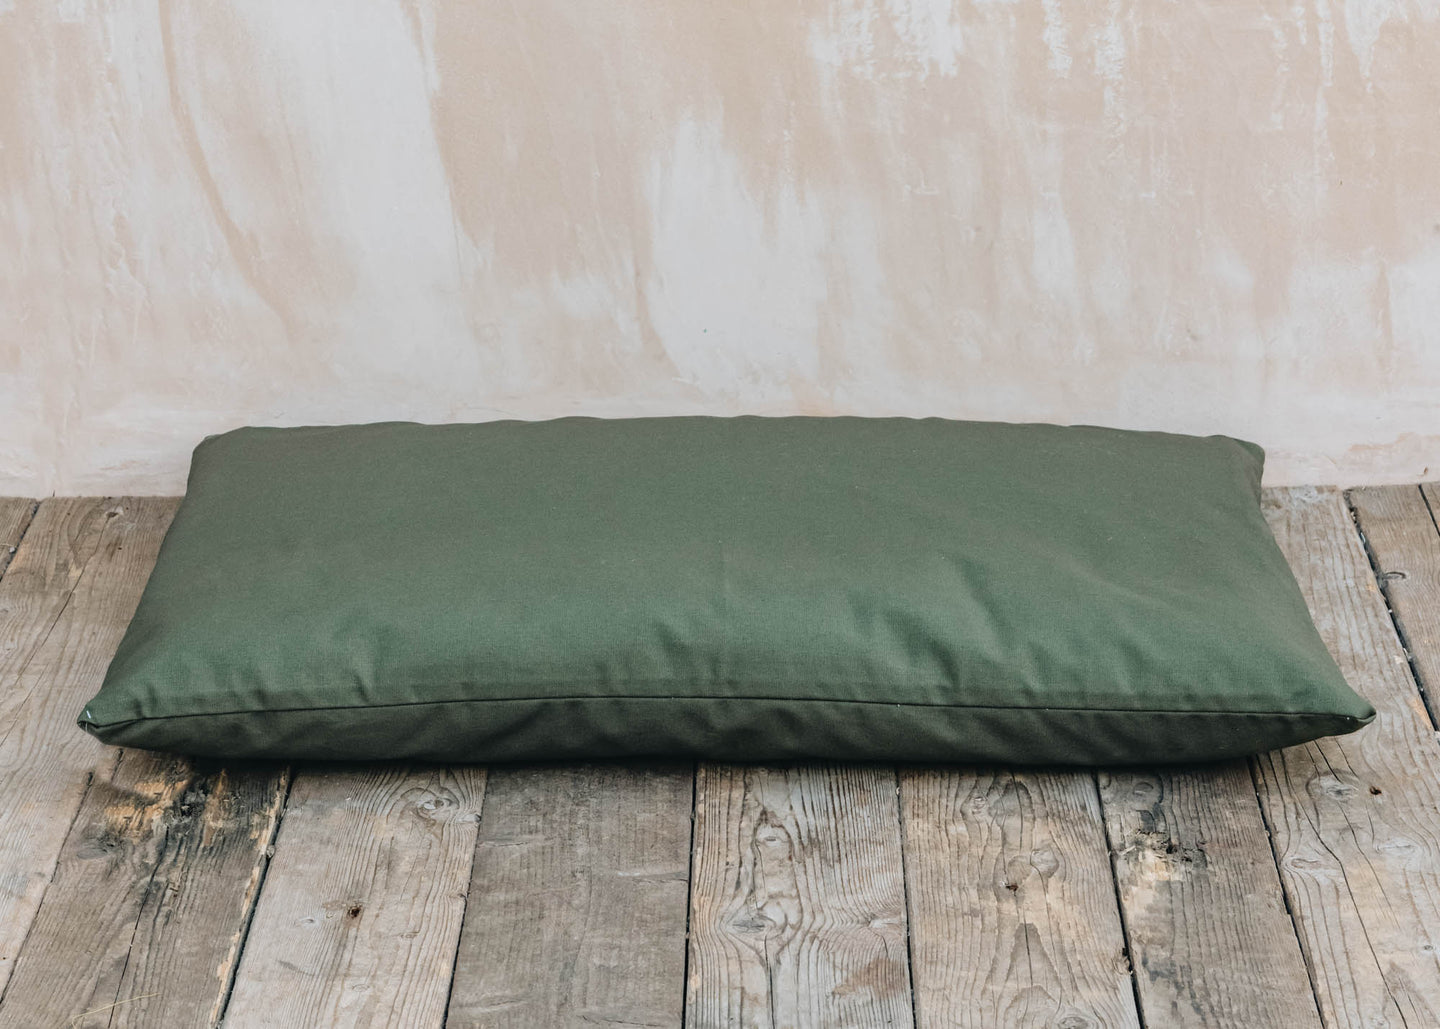 Pooch & Paws Large Water Resistant Pet Bed in Olive Green